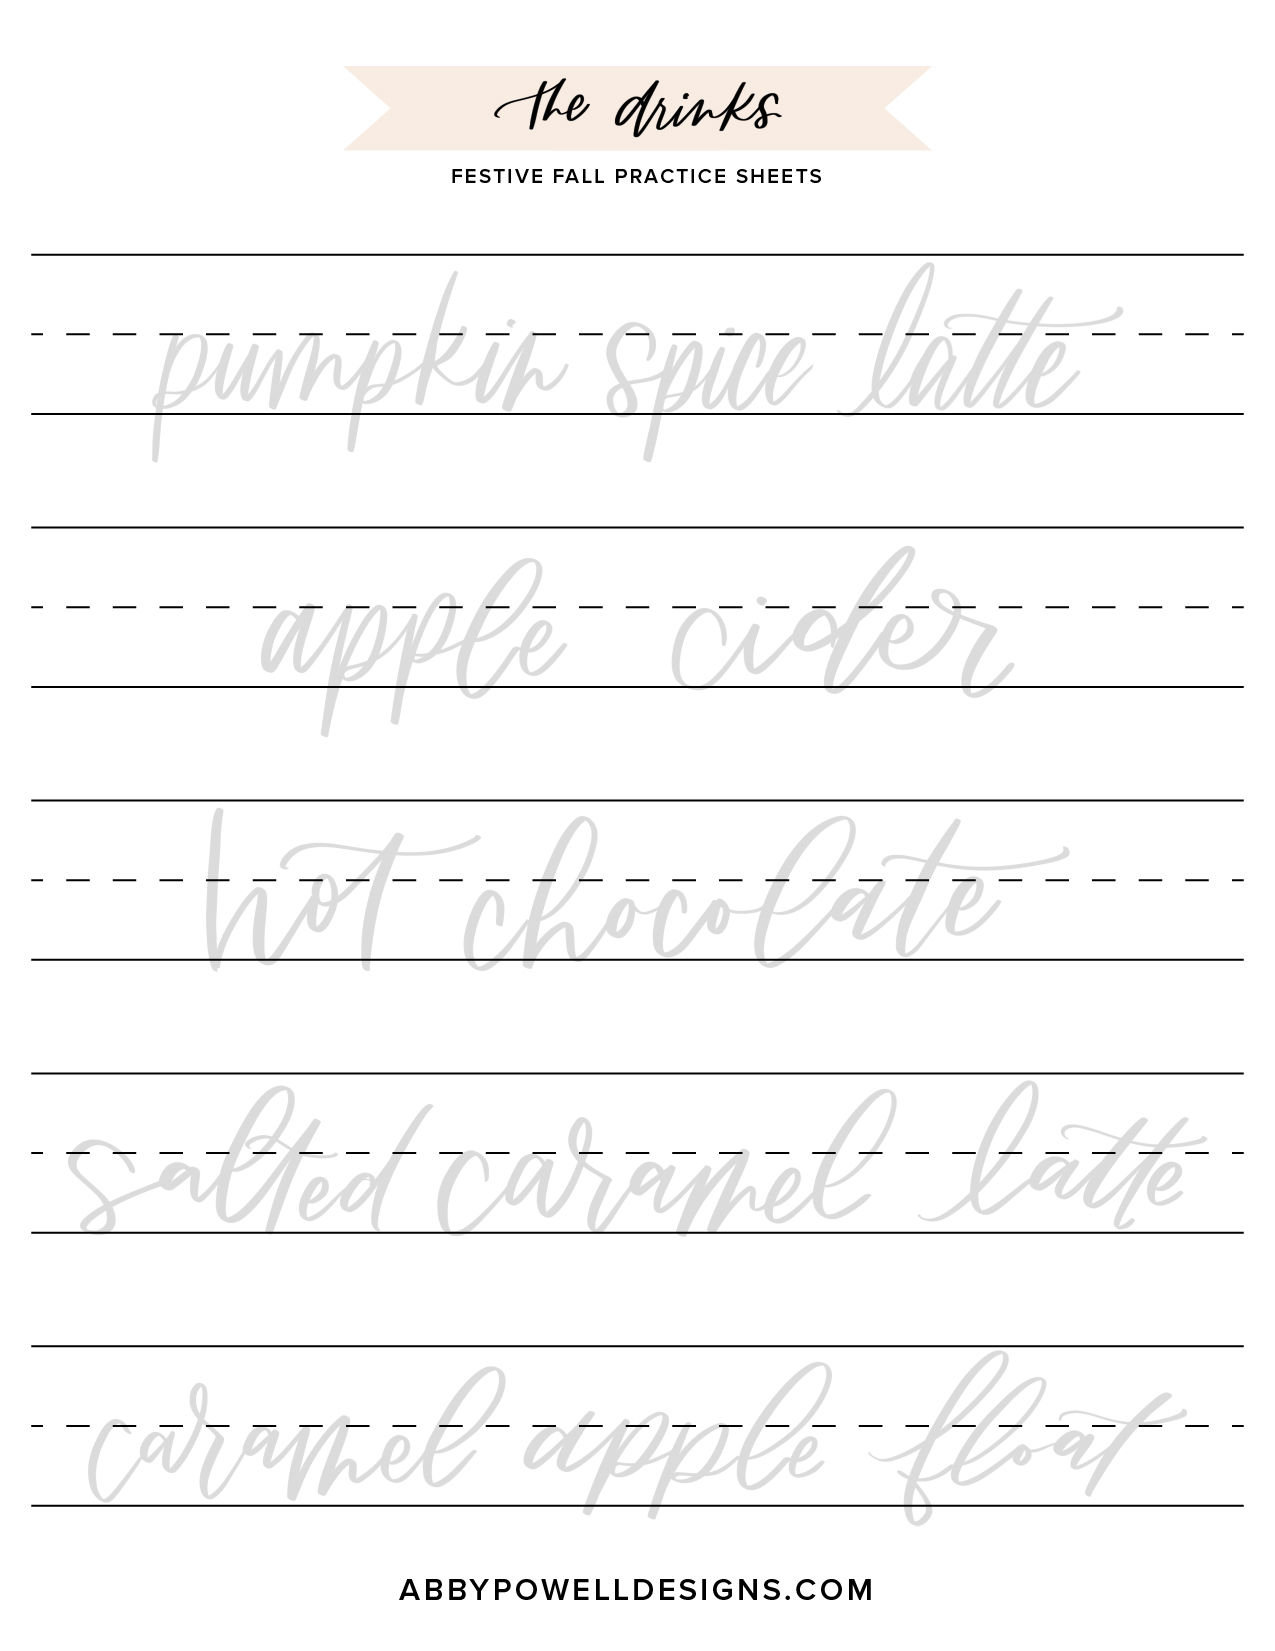 Learn to letter from home with these fall practice sheets from Abby Powell.